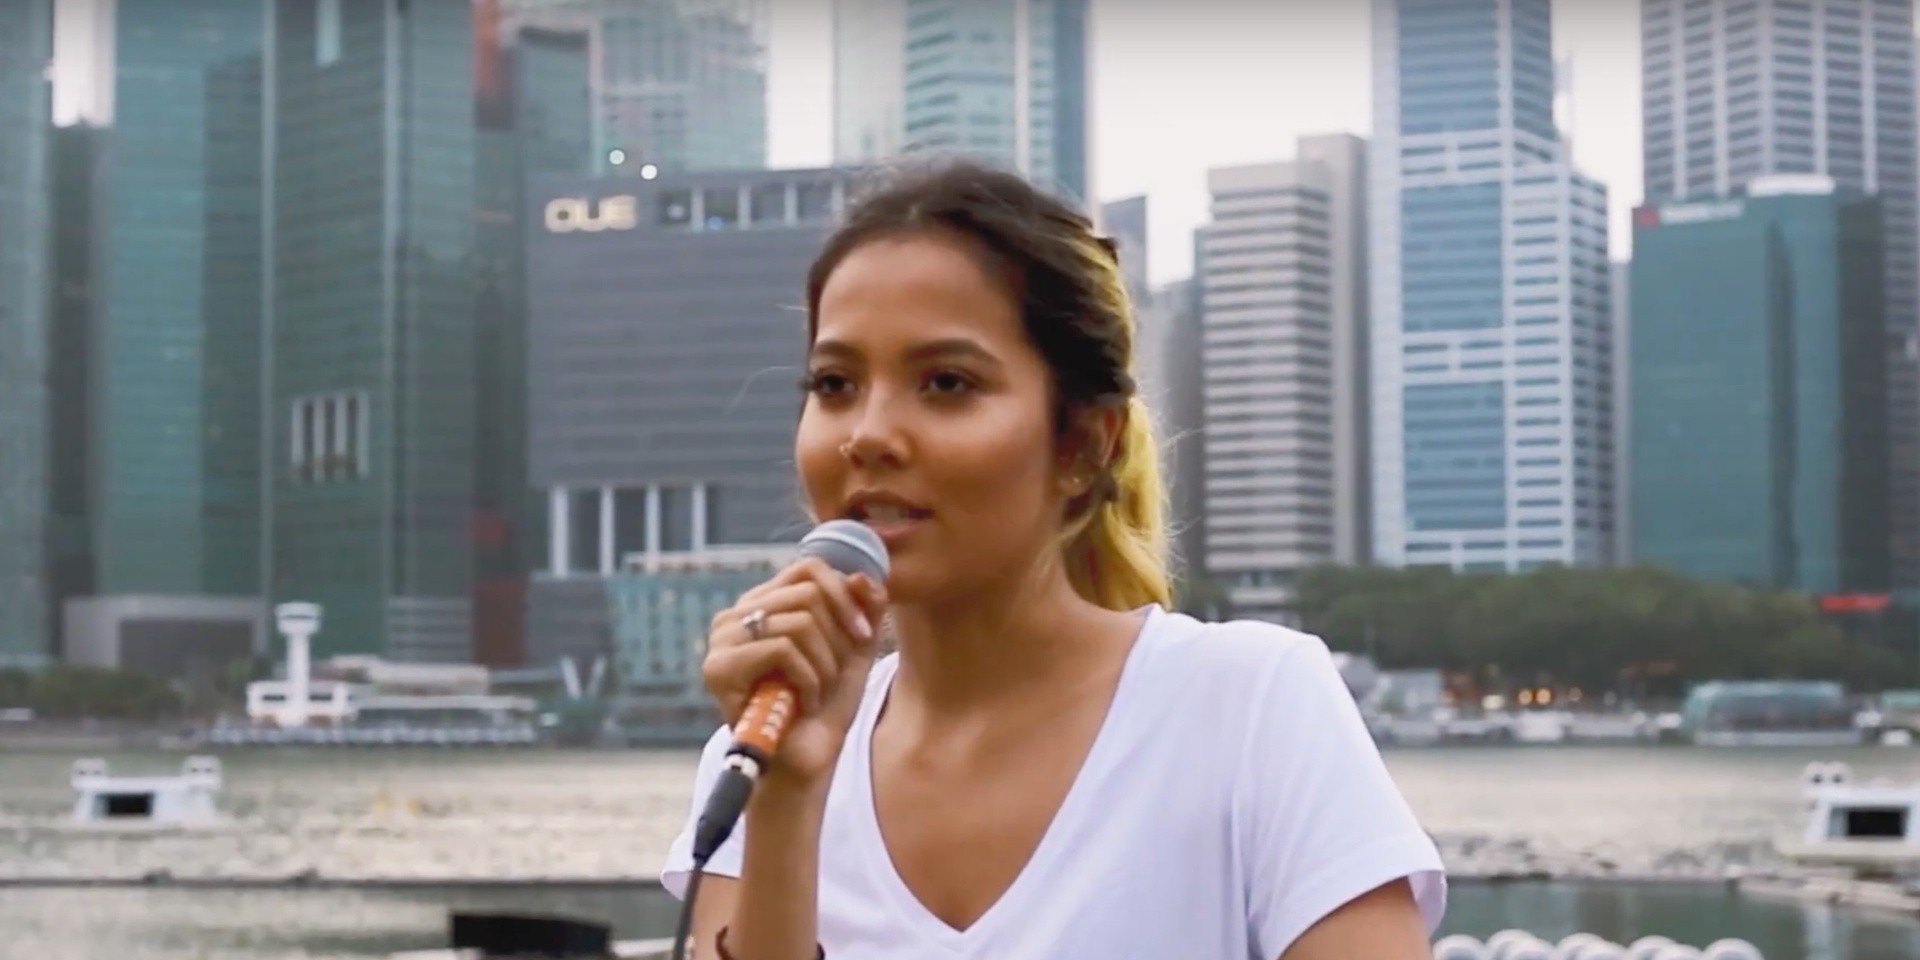 Aisyah Aziz talks about how she got her start in music, her inspirations, singing in Malay and more – watch